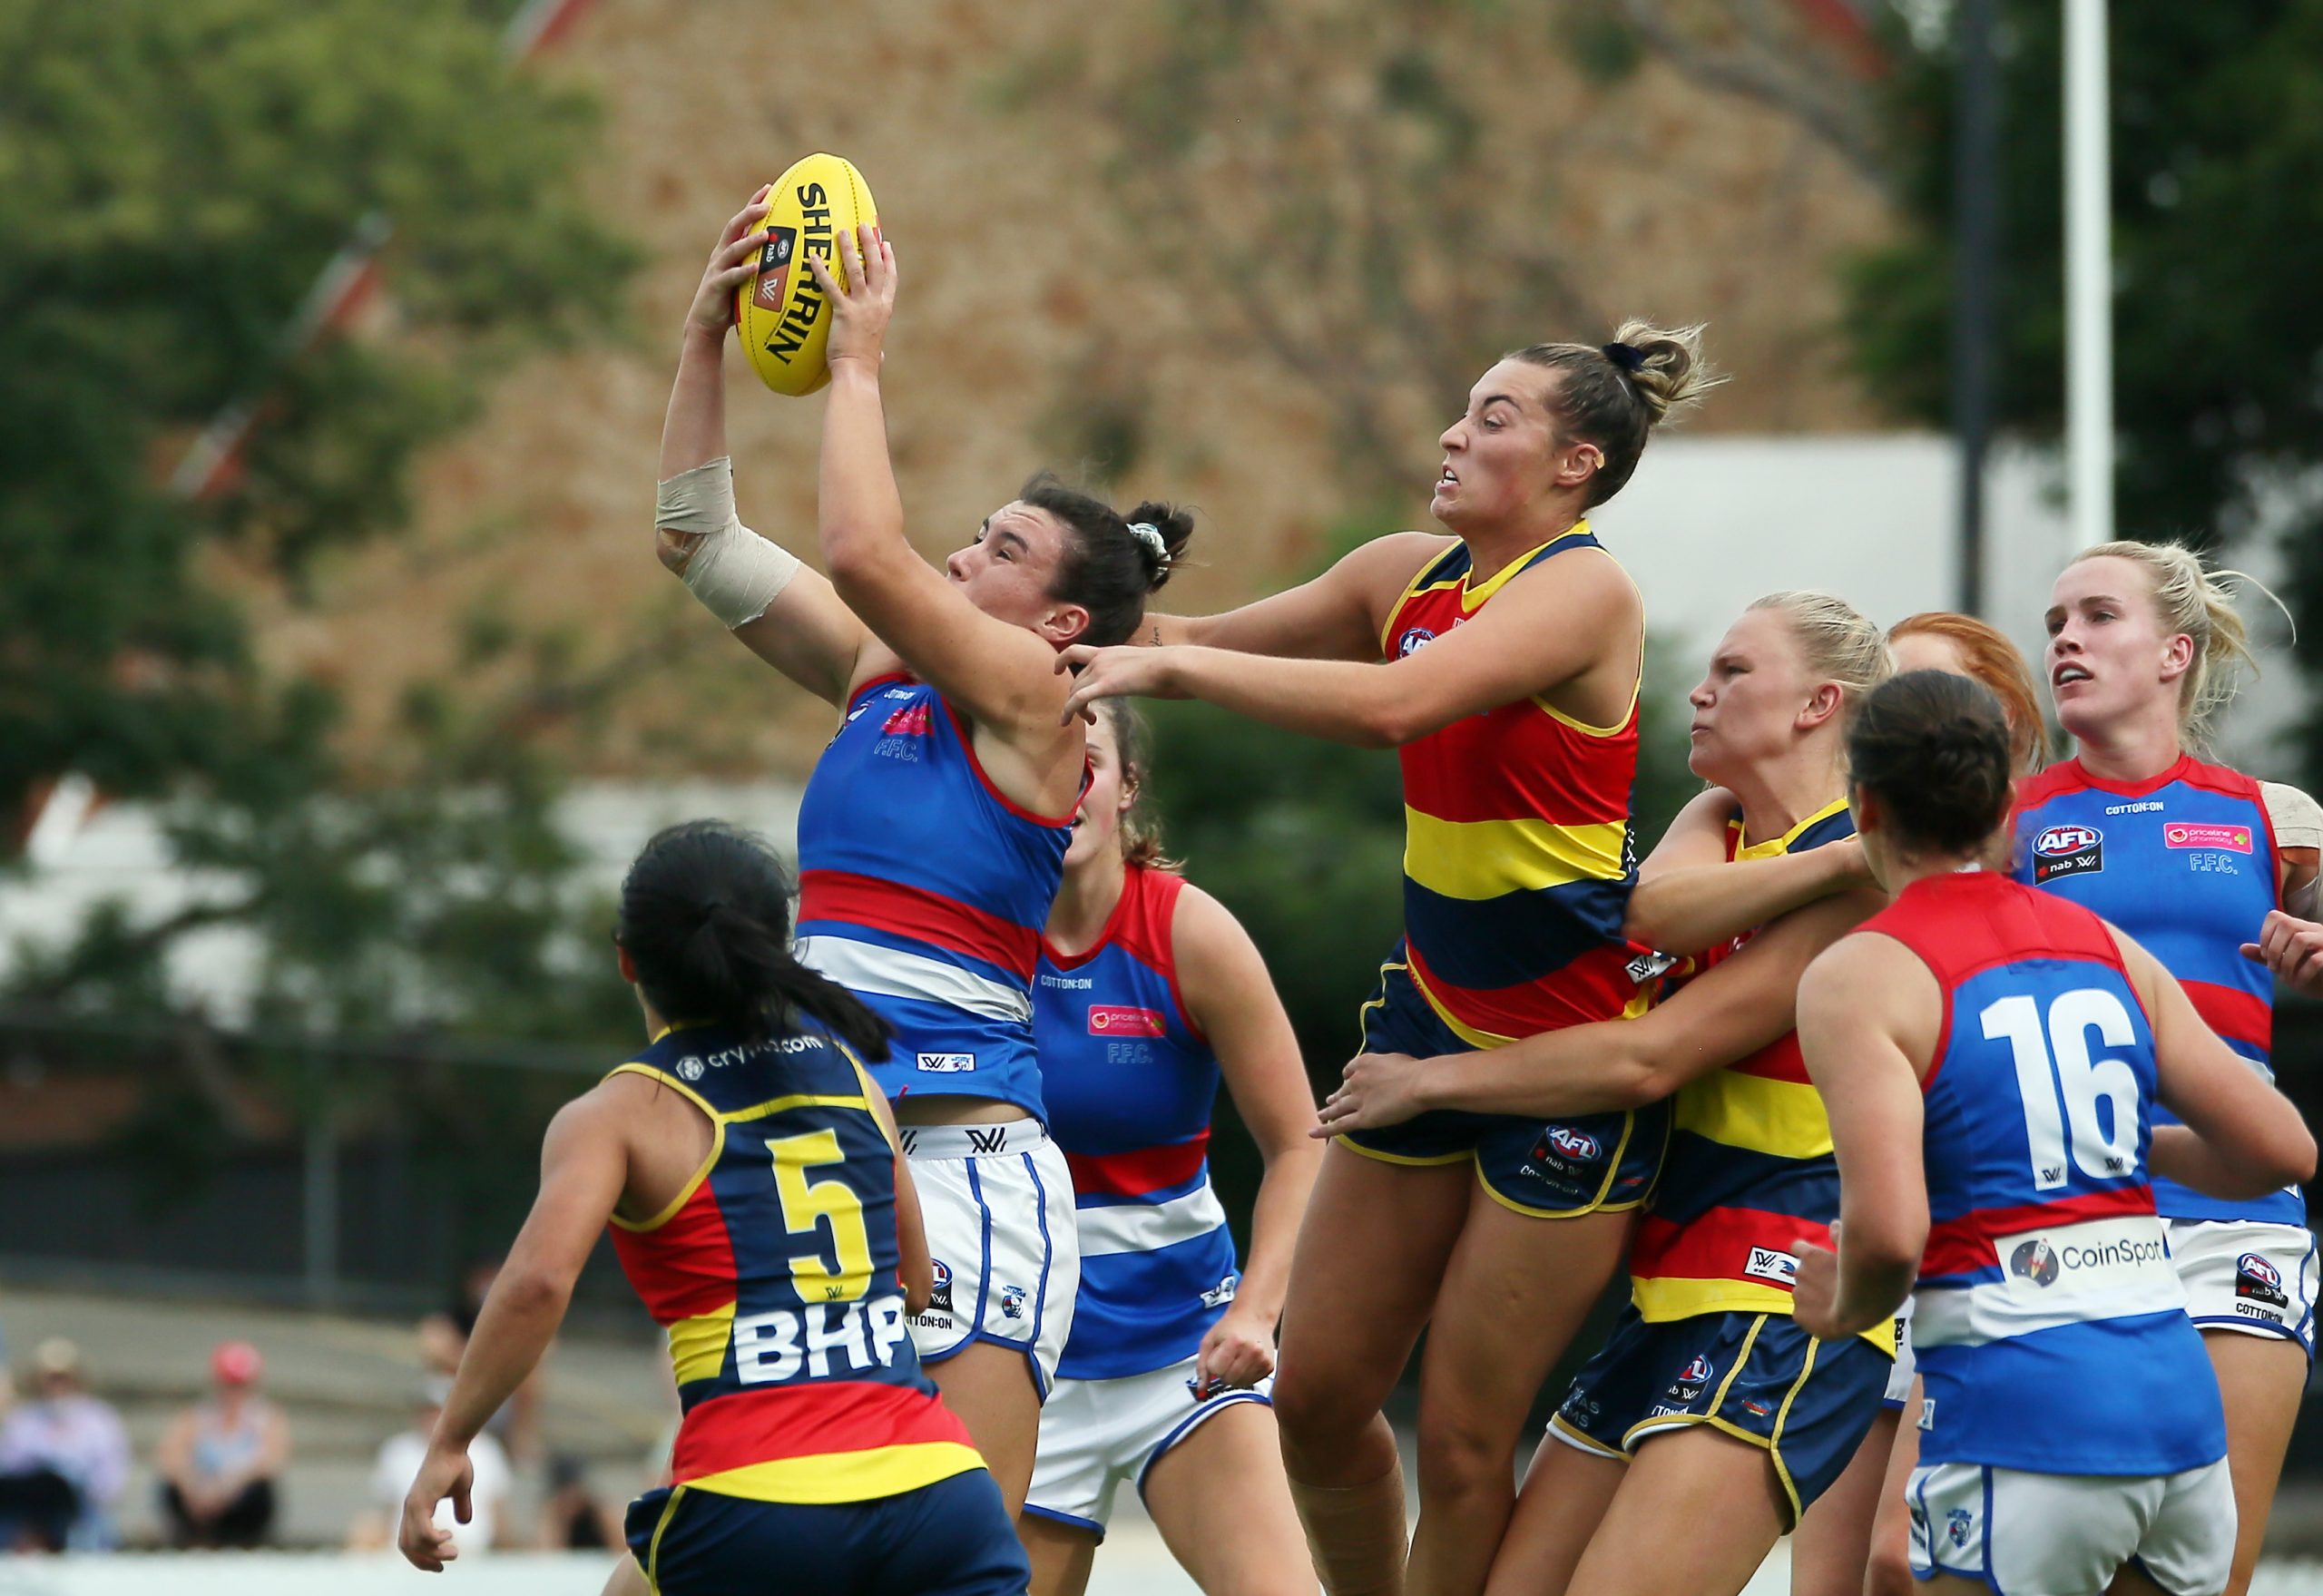 Fierce competition. It was a crowded scene as Adelaide tried to overcome the Western Bulldogs for a mark. PICTURE: PETER ARGENT